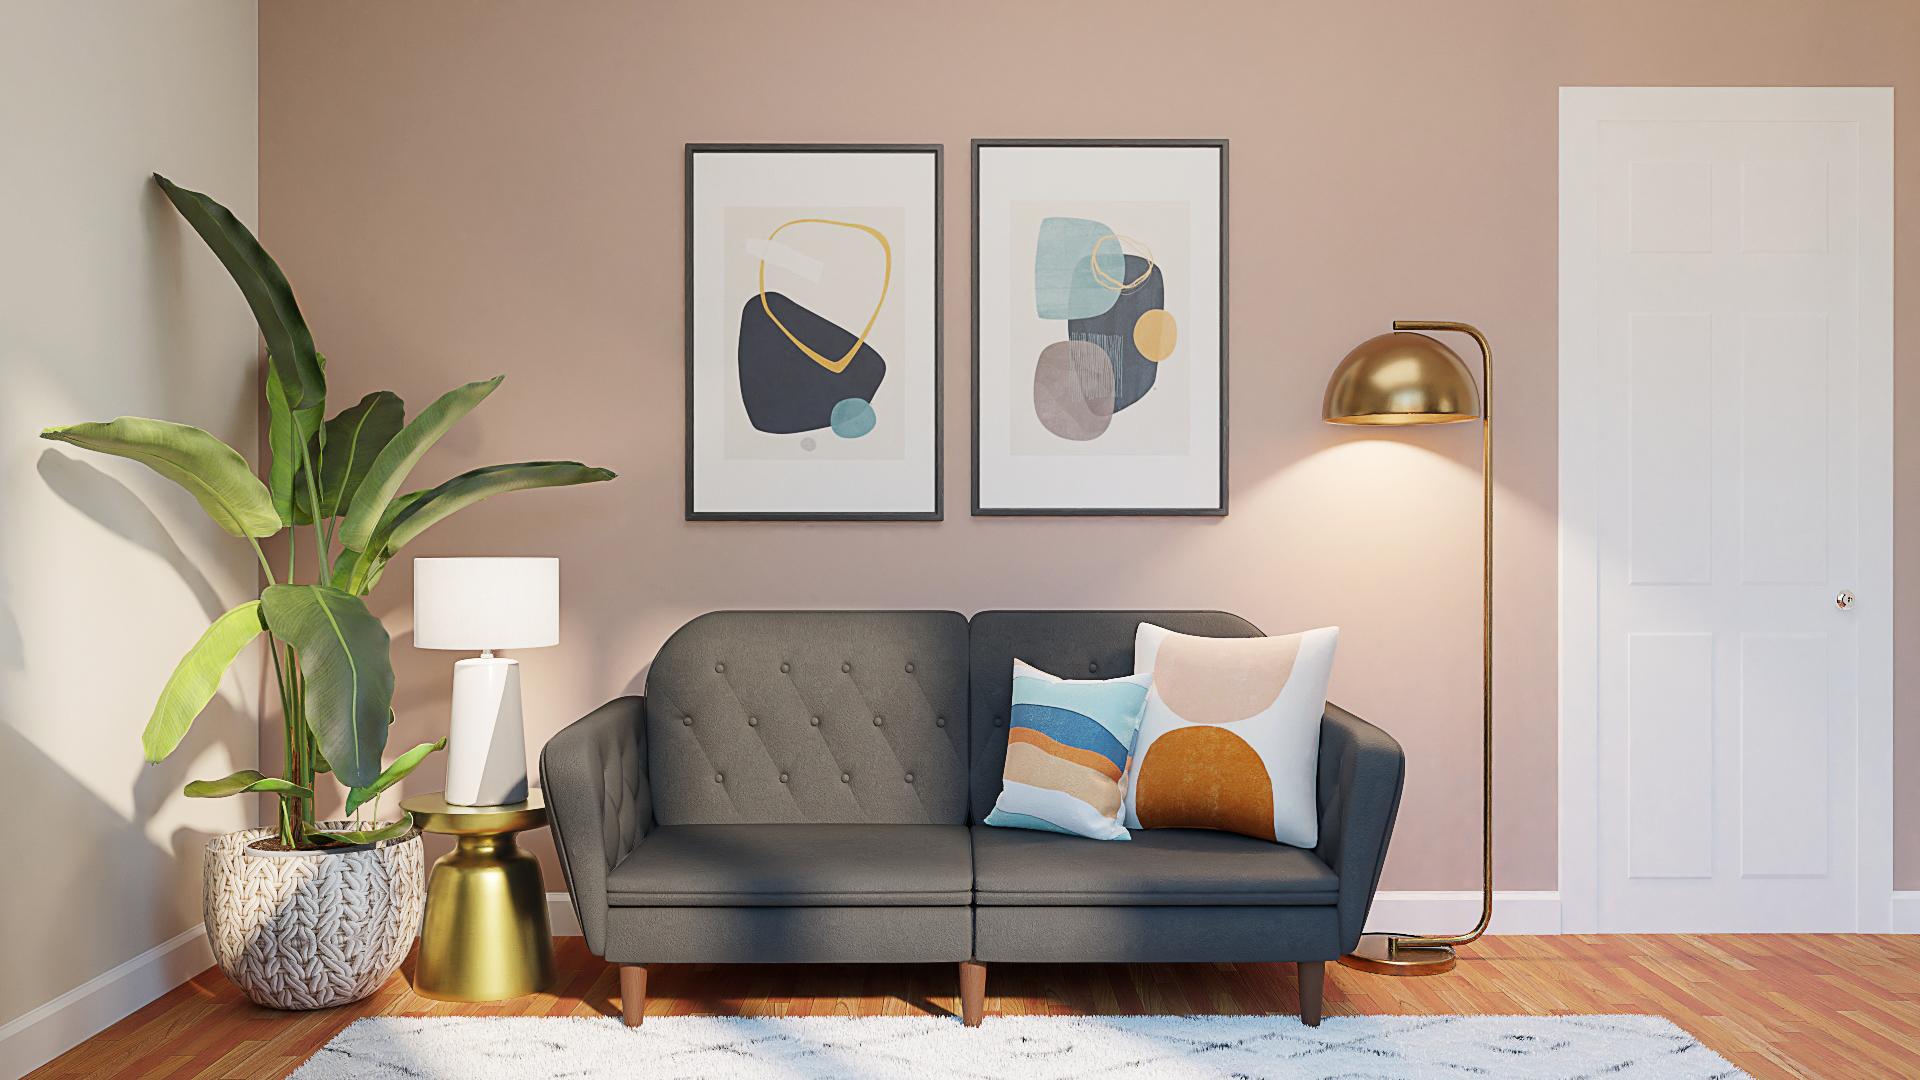 Splashes Of Blue & Gold: A Mid-Century Glam Home Office